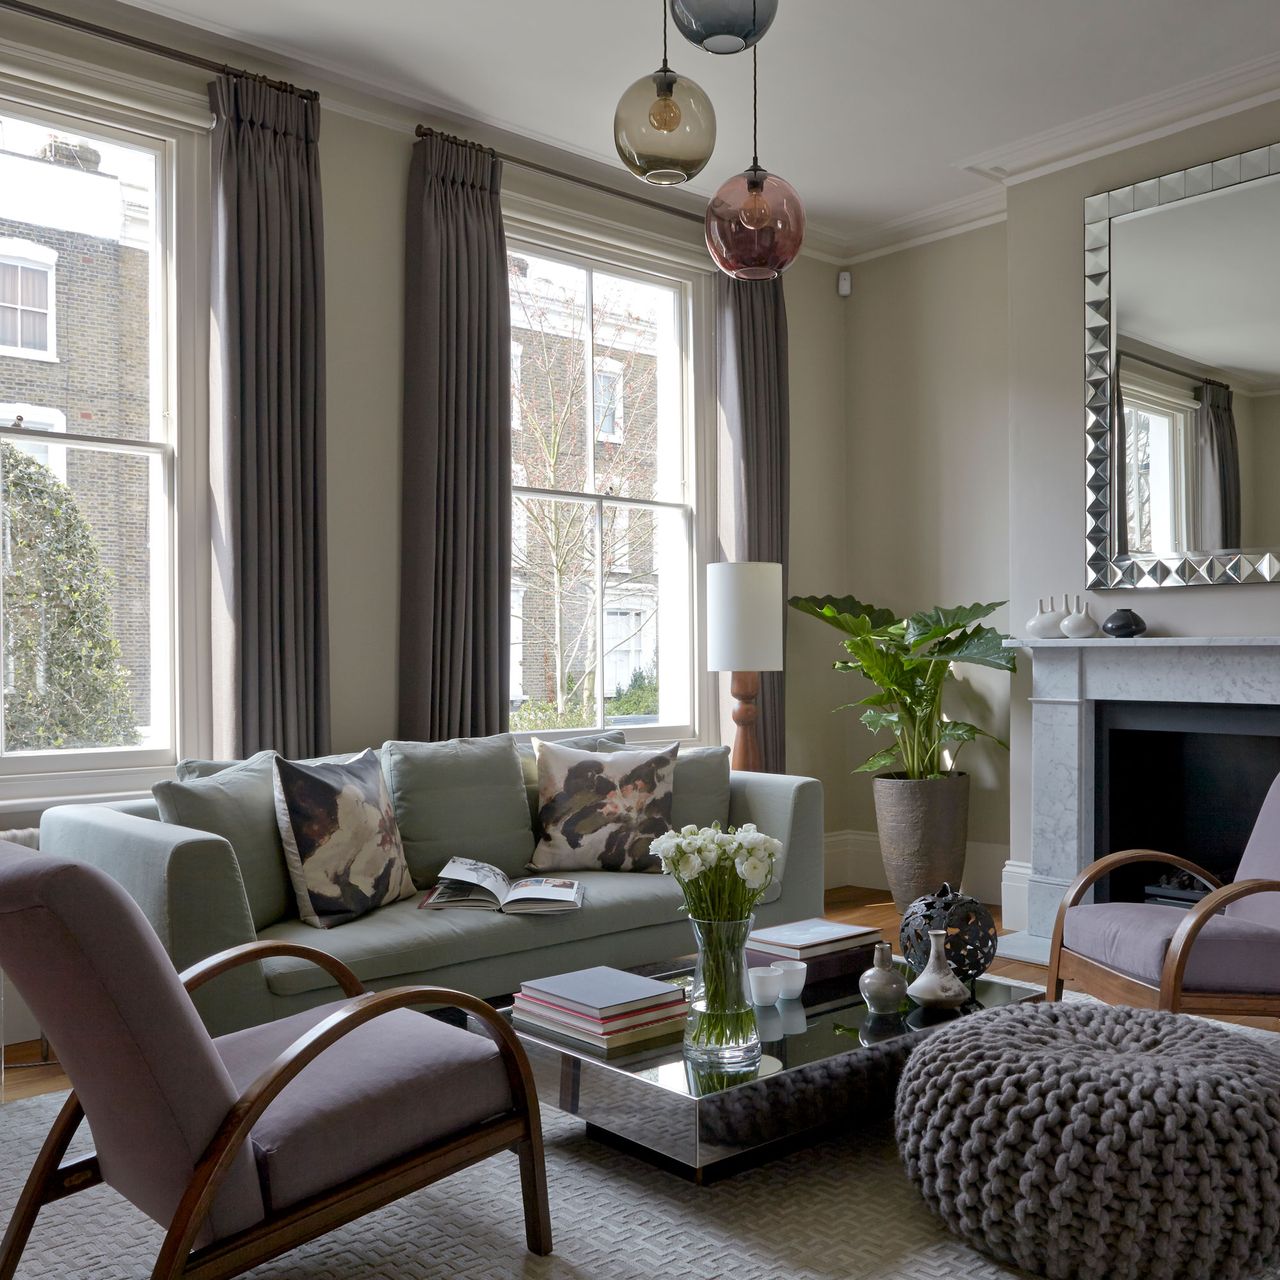 10 Grey living room mistakes to avoid, according to experts | Ideal Home